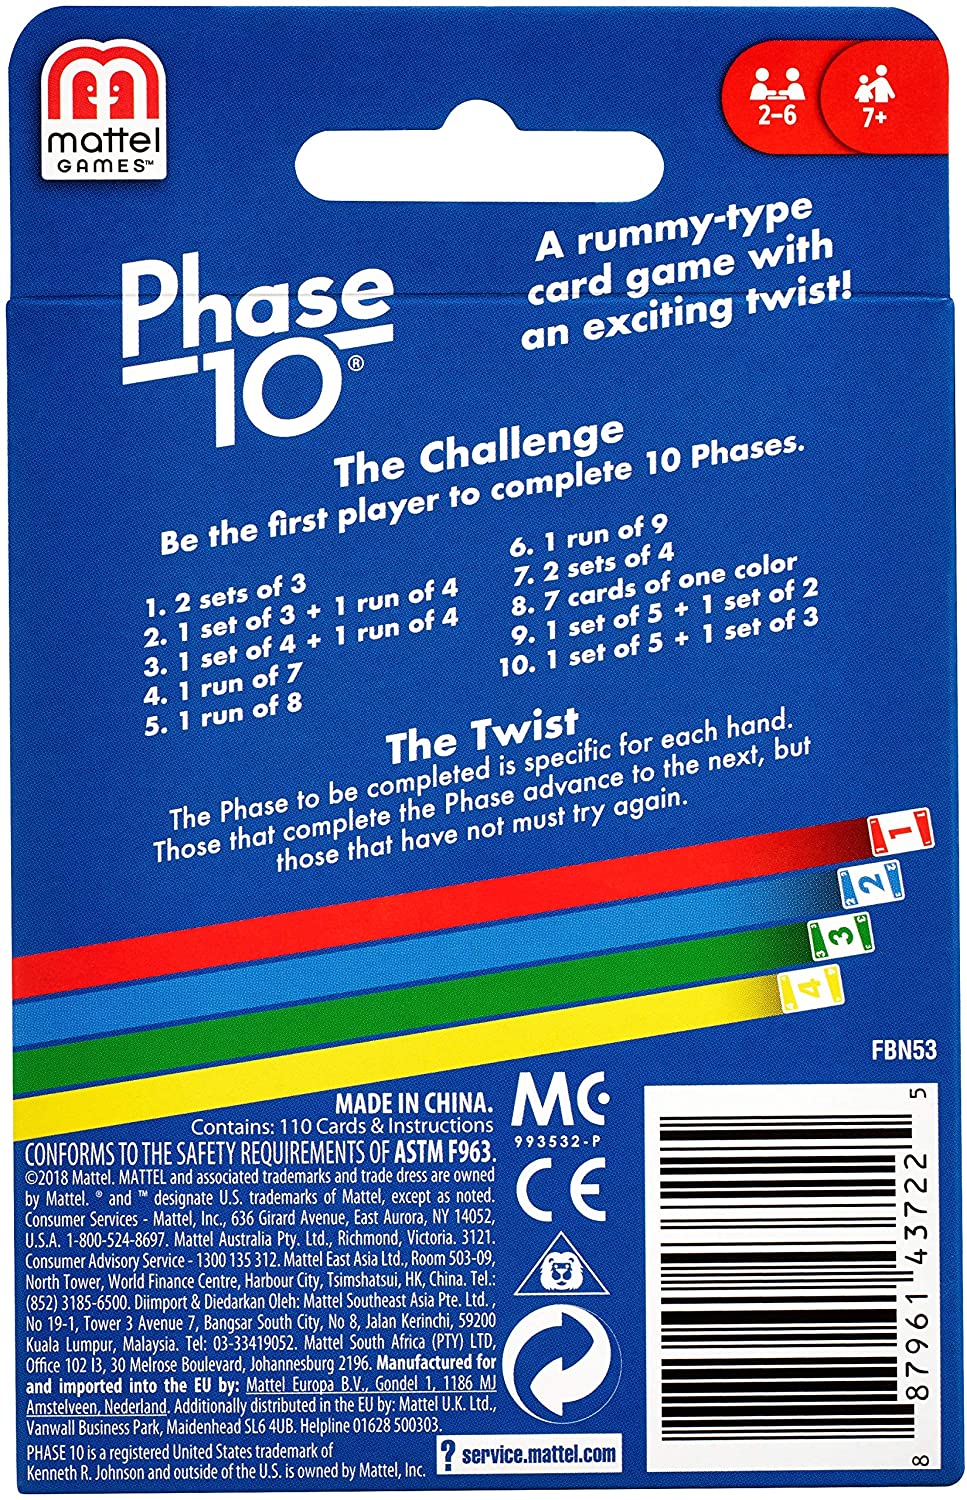 Phase 10 Card Game, Family Game for Adults & Kids, Challenging & Exciting  Rummy-style Play 